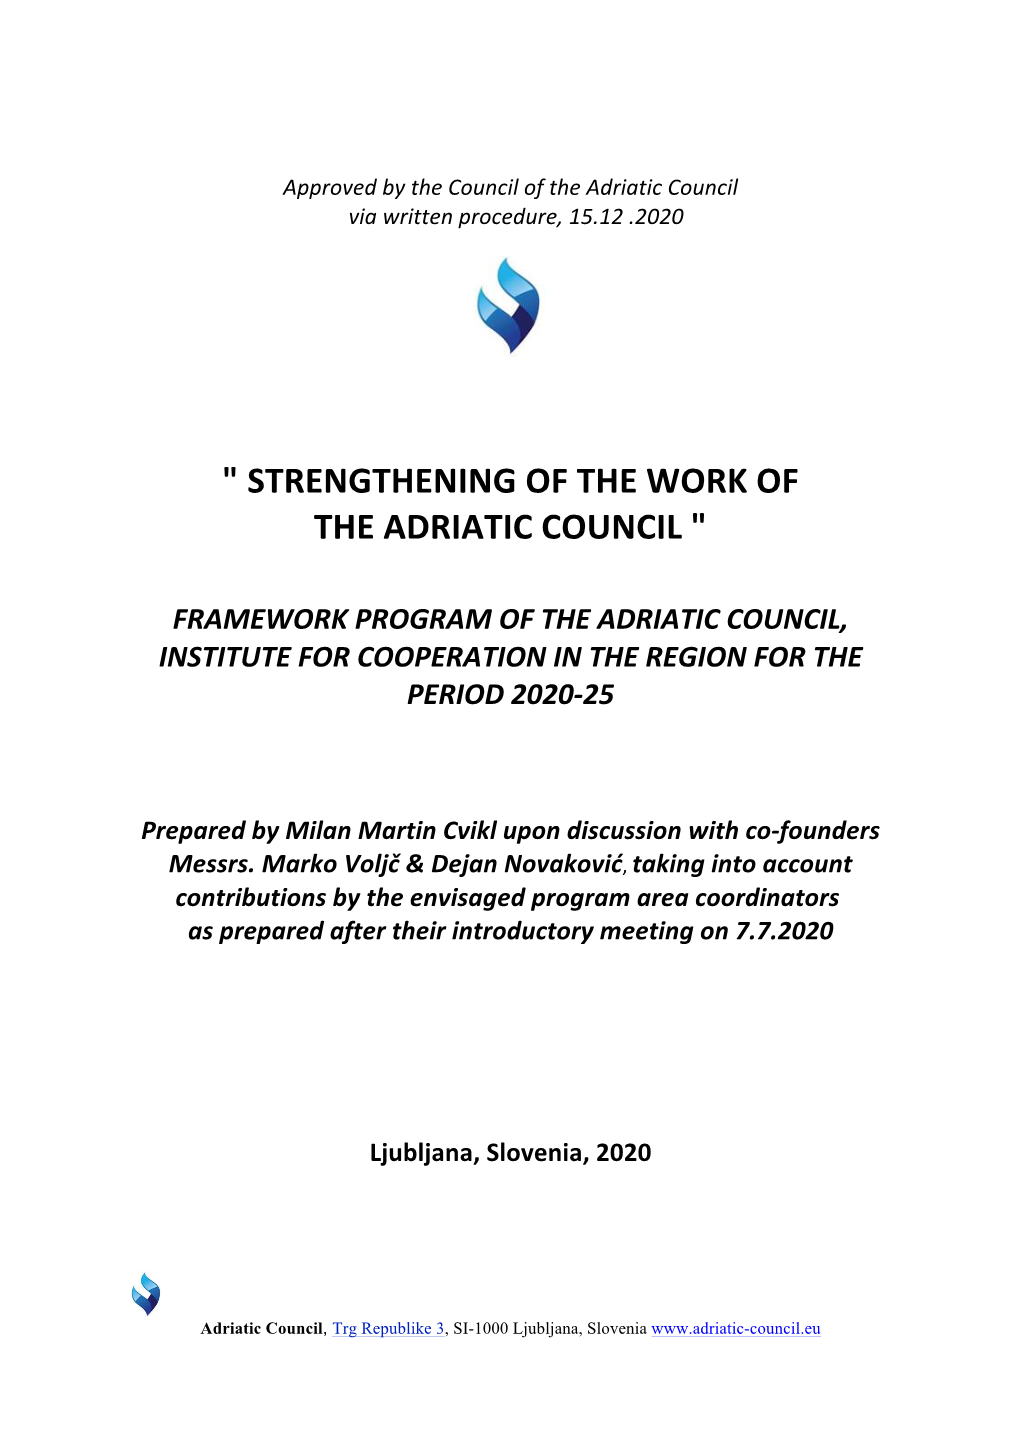 " Strengthening of the Work of the Adriatic Council "